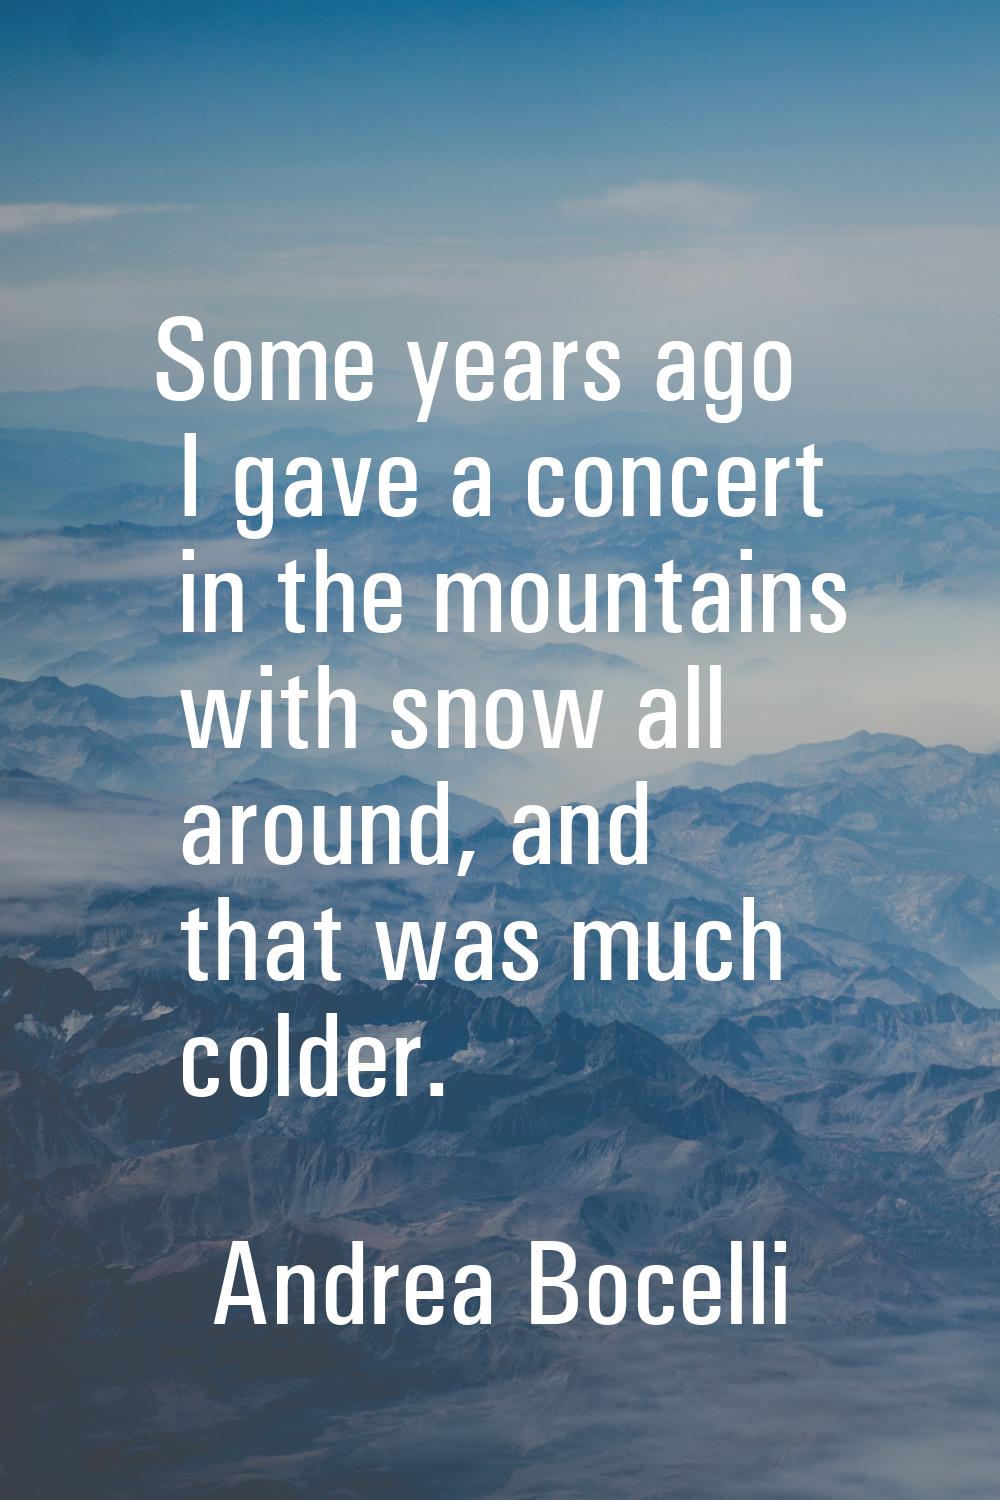 Some years ago I gave a concert in the mountains with snow all around, and that was much colder.